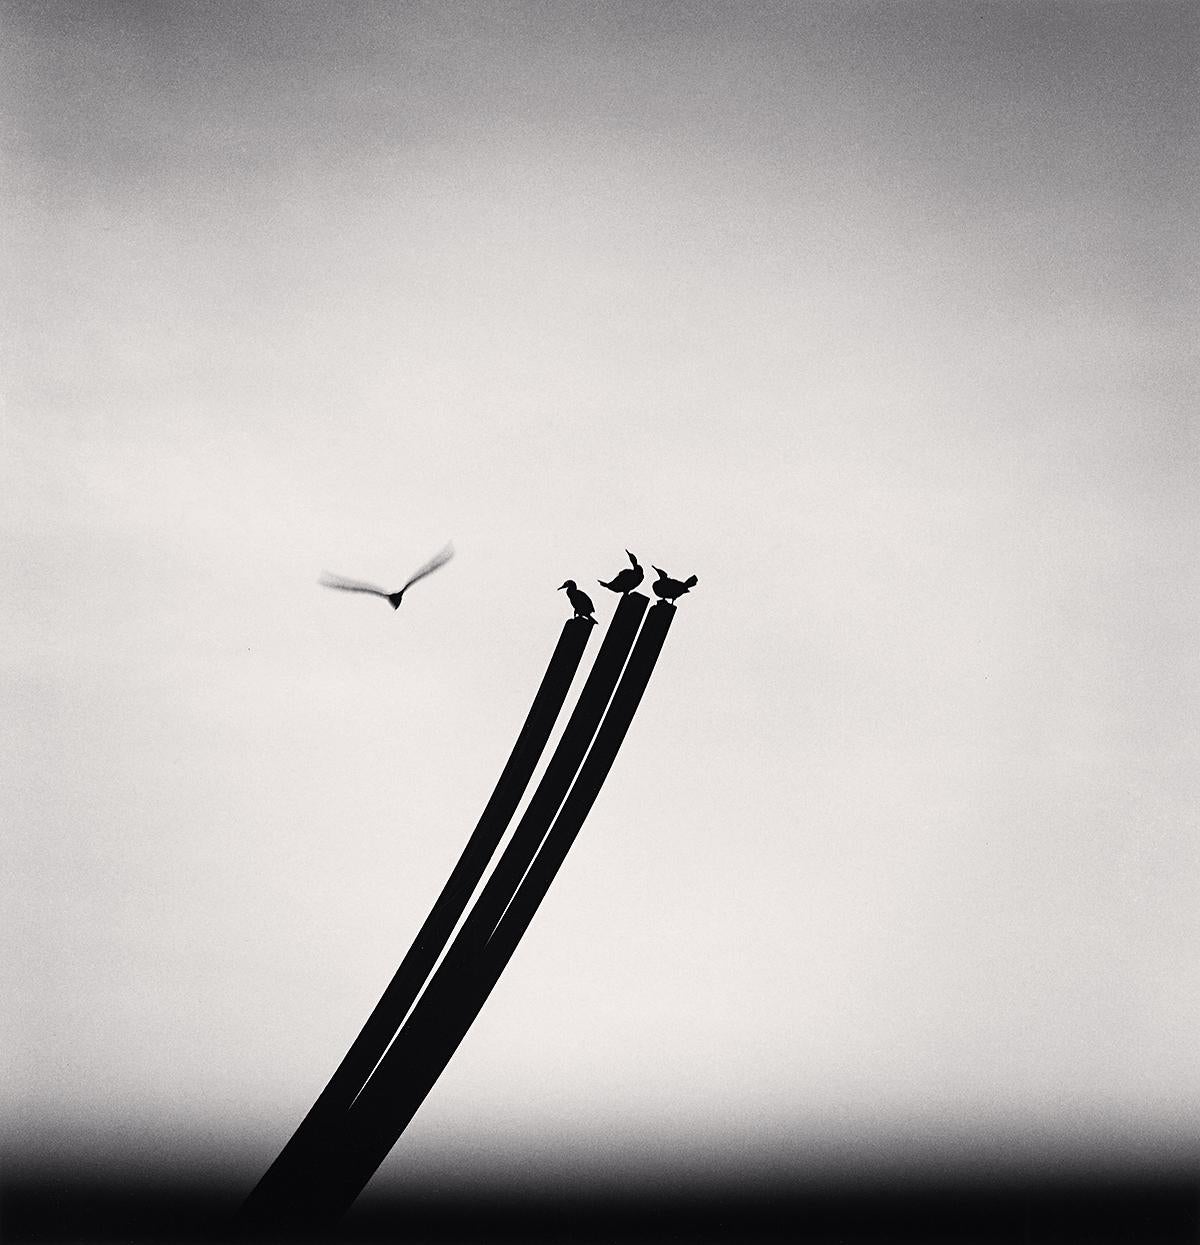 Michael Kenna Black and White Photograph - Four Birds, St. Nazaire, France 